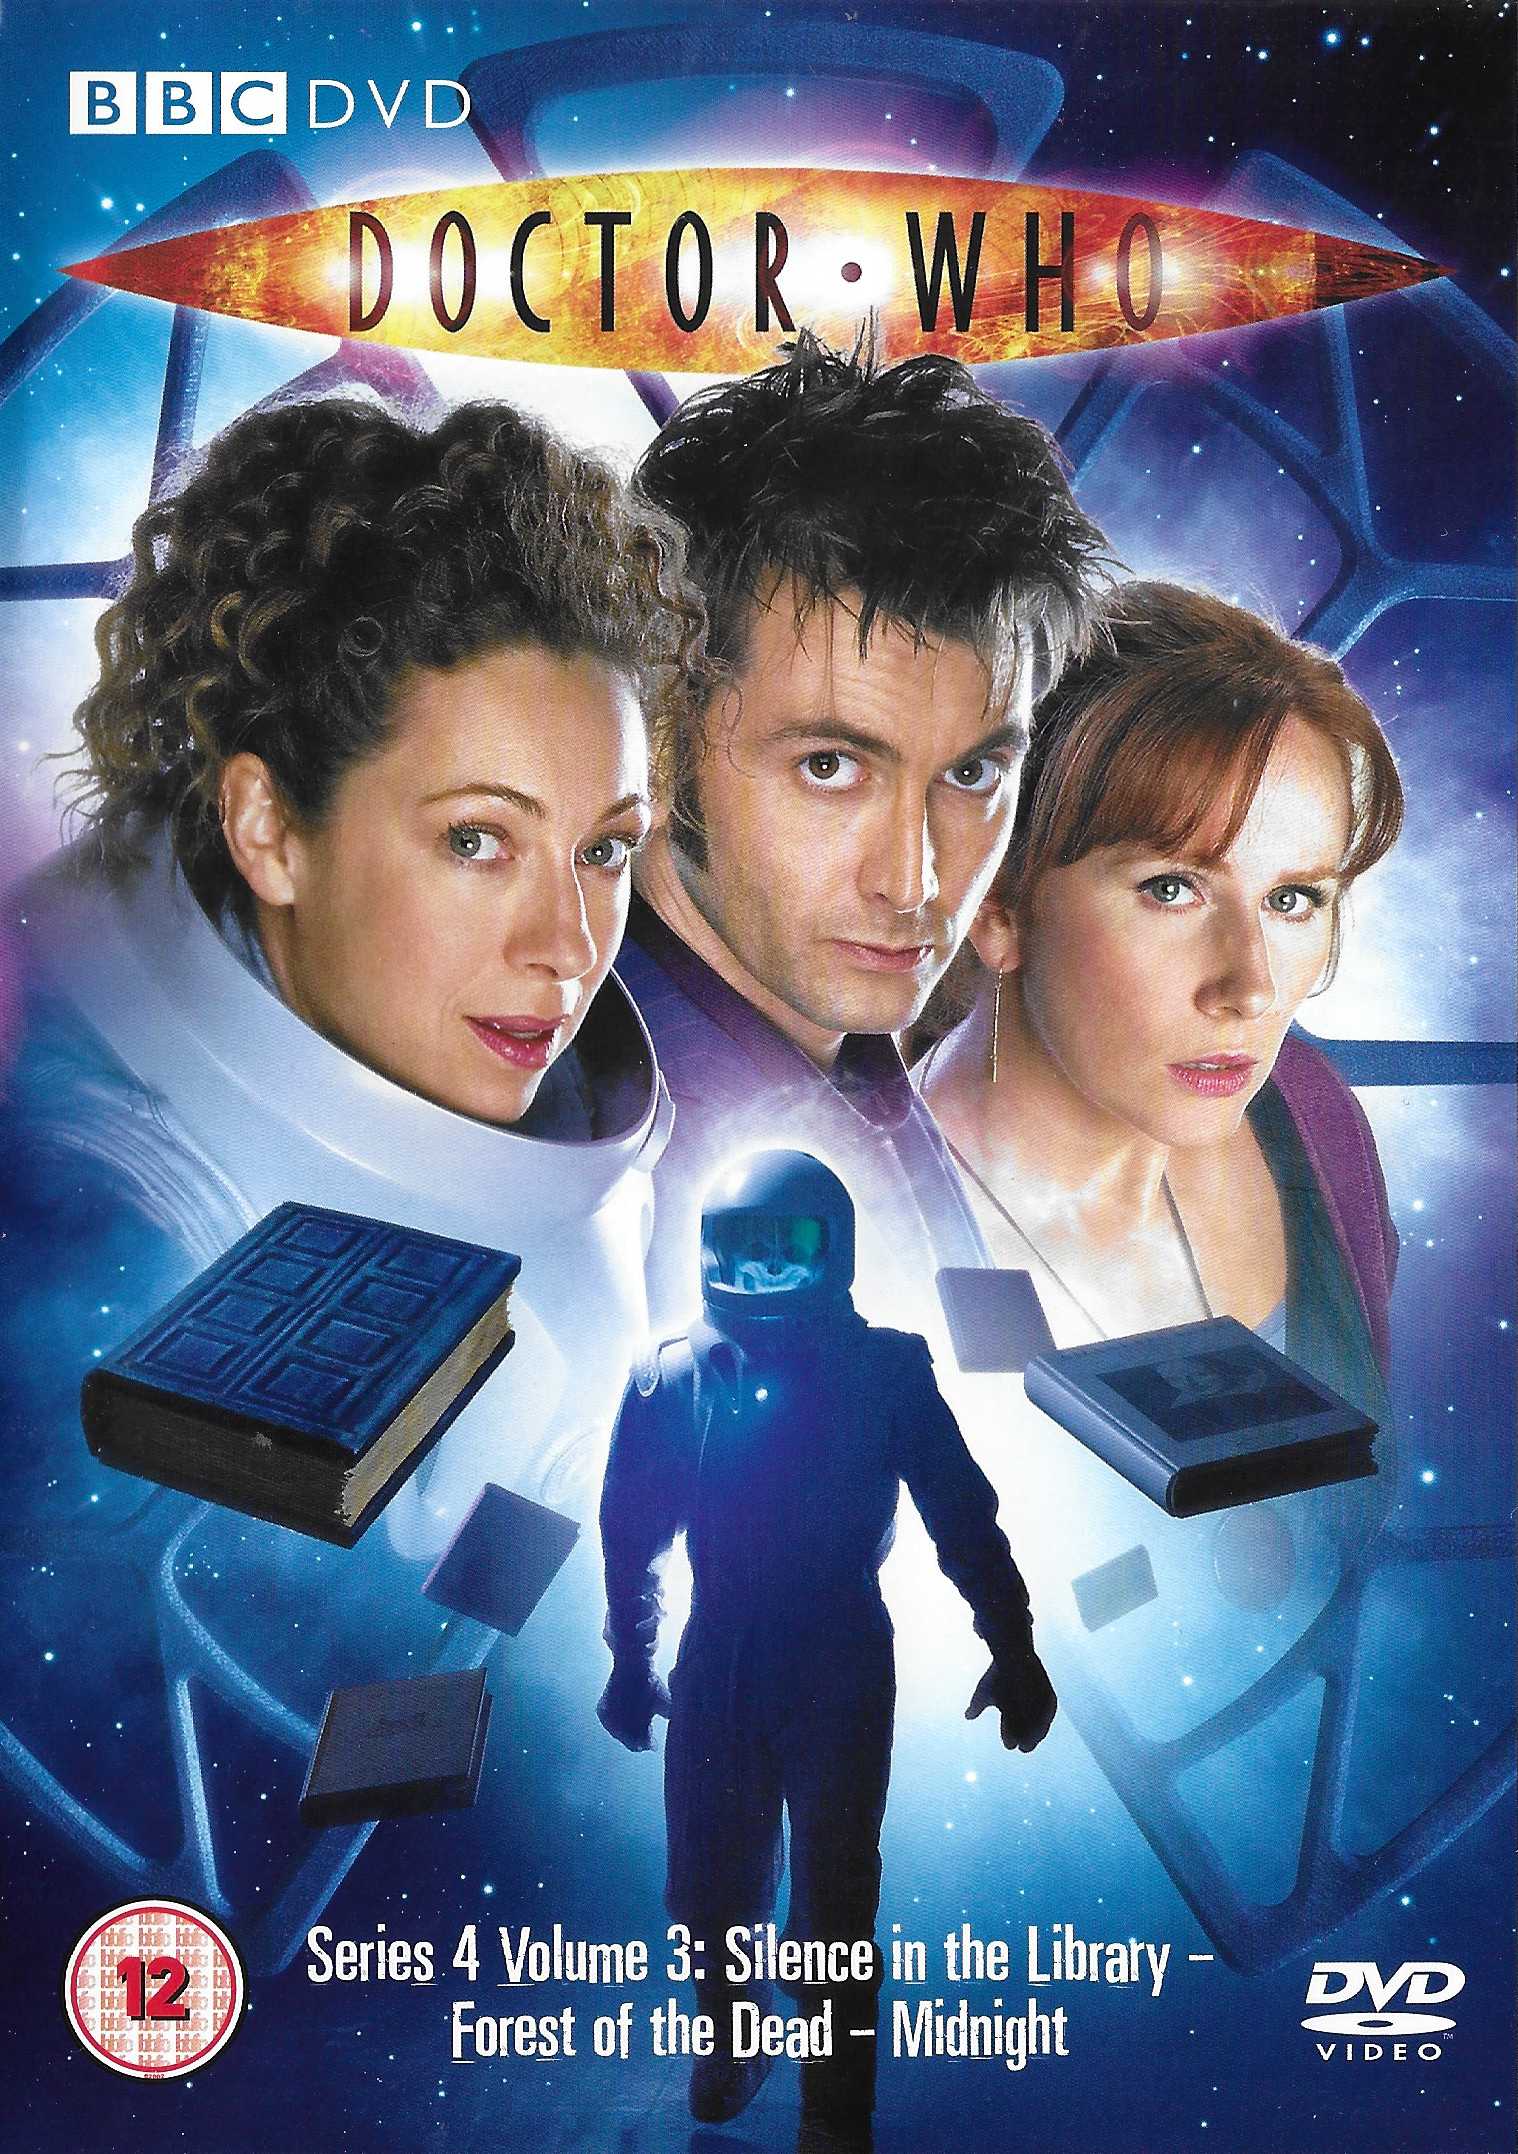 Picture of BBCDVD 2607 Doctor Who - Series 4, volume 3 by artist Steven Moffat / Russell T Davies from the BBC records and Tapes library